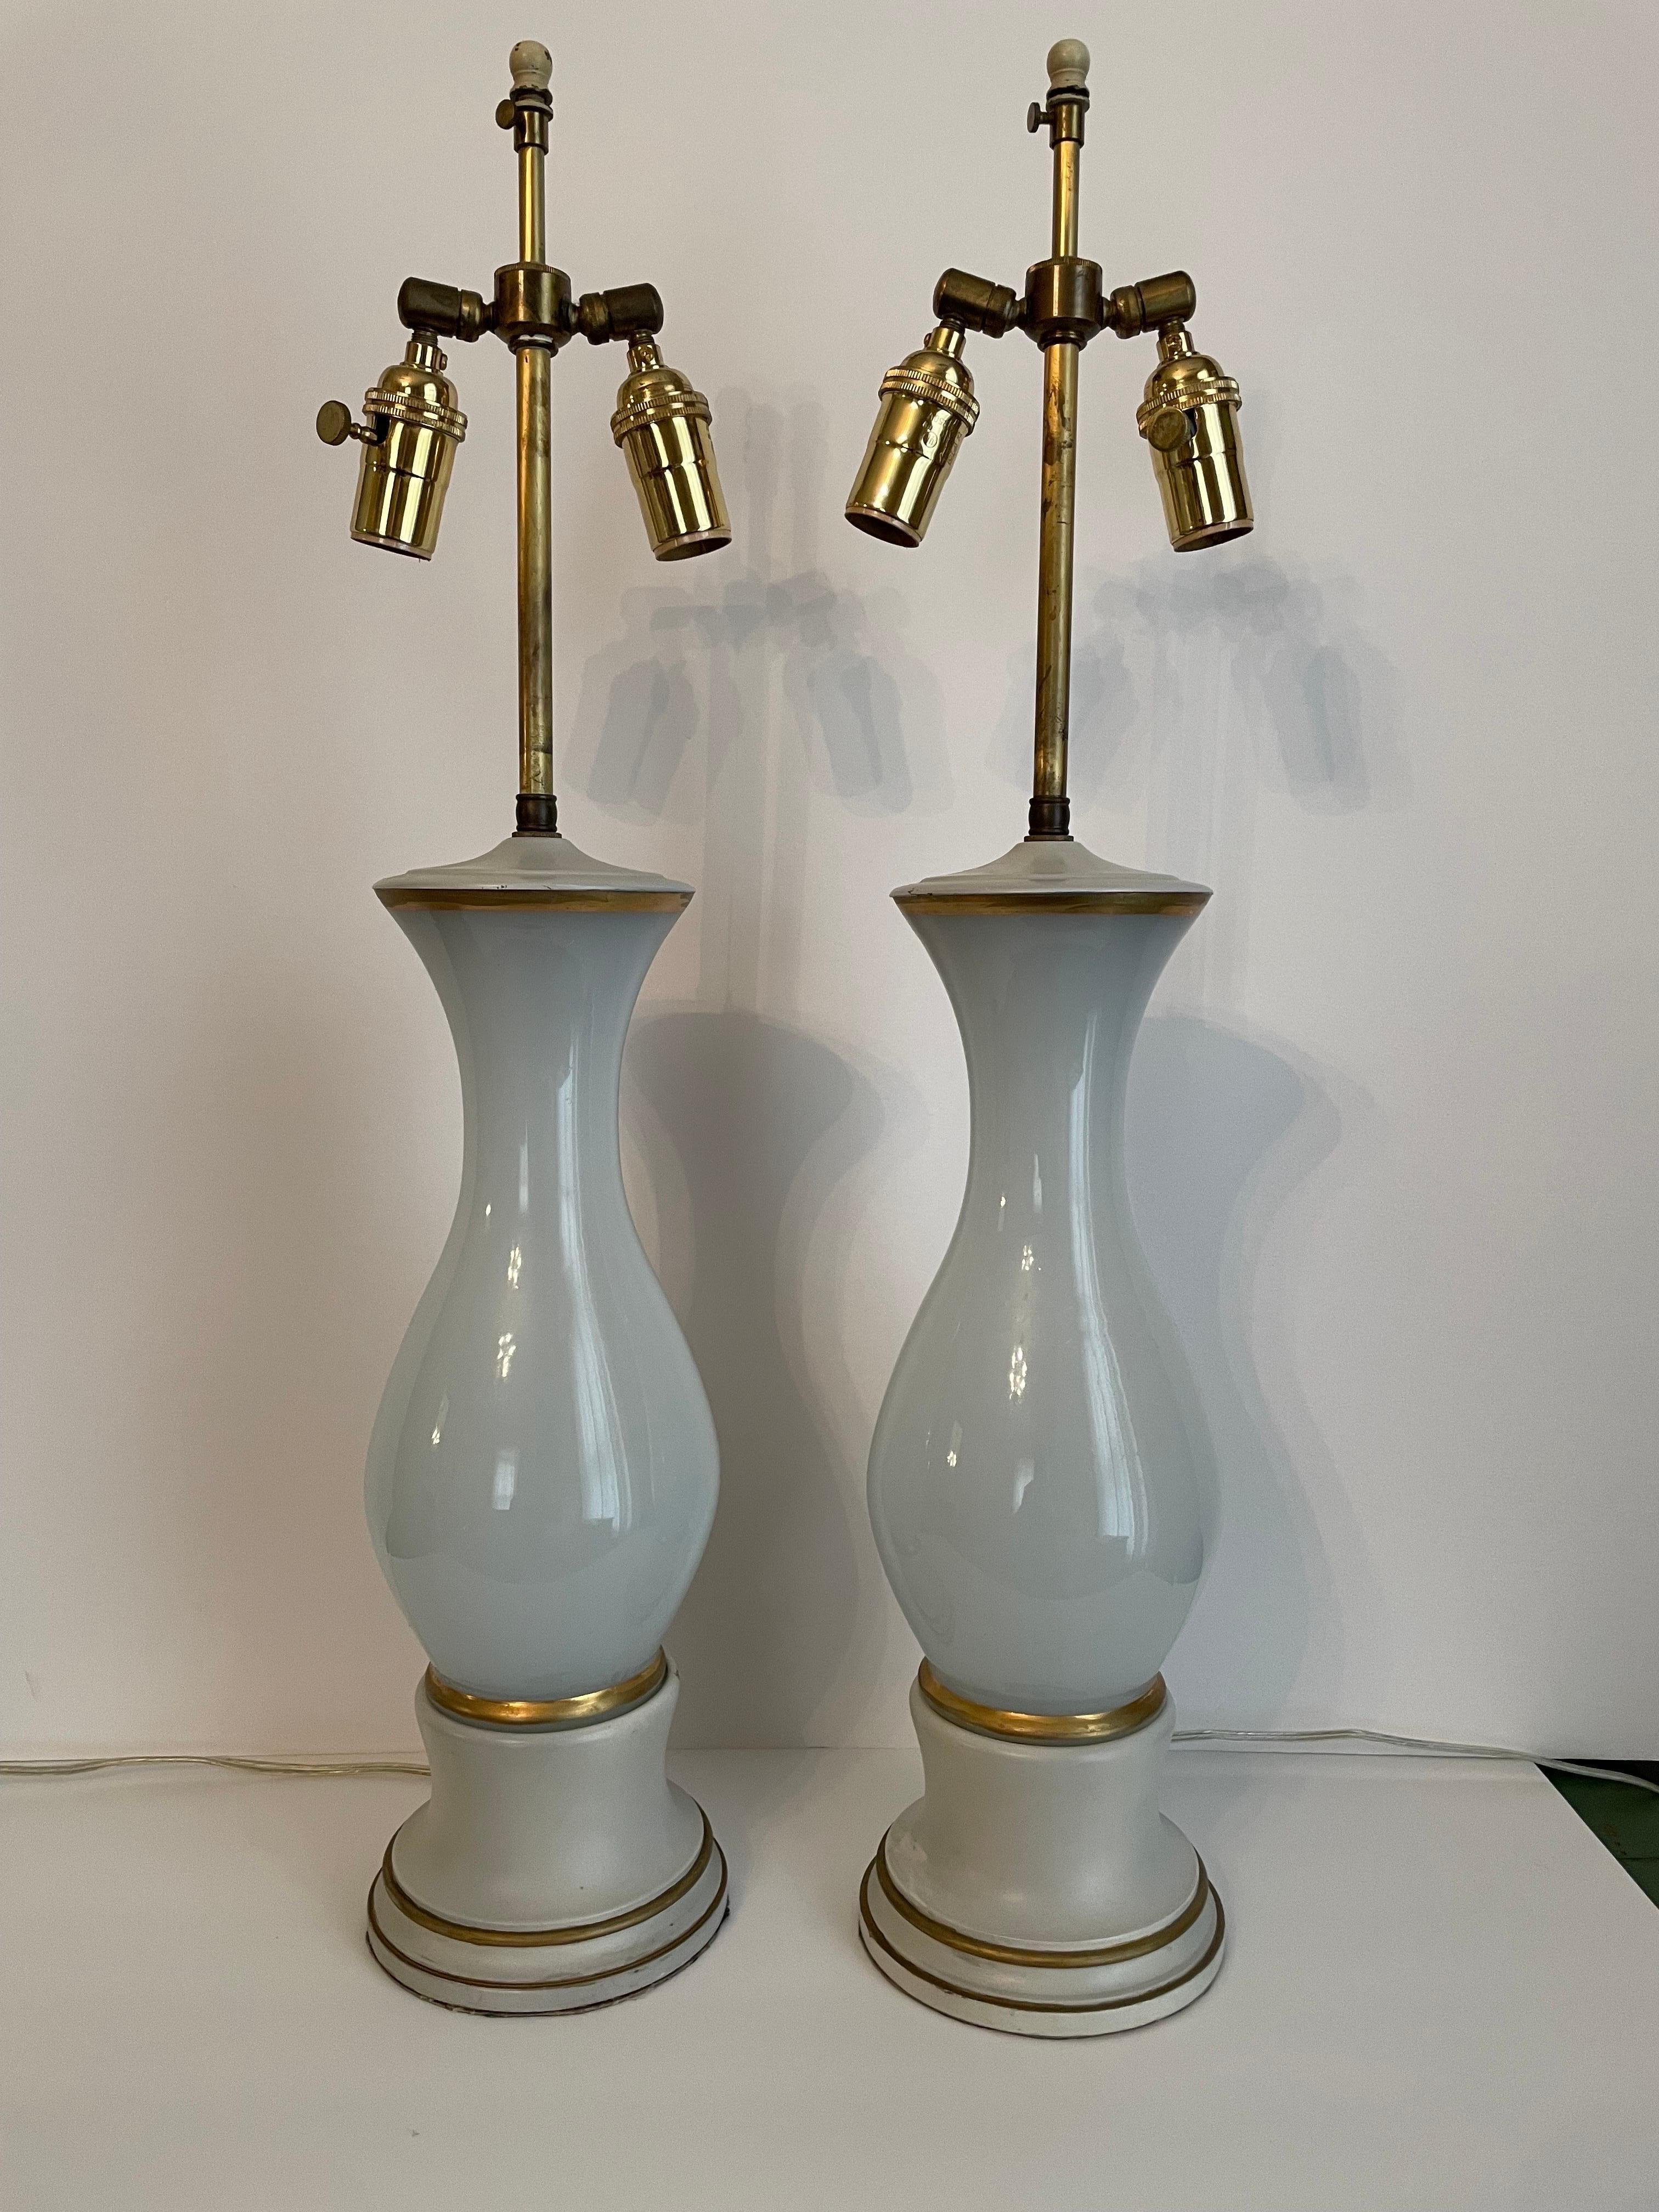 Pair Italian Opalescent glass lamps on gilt and painted bases. Two sockets each with adjustable shade rests. Rewired with new brass three way sockets and long cords. Good working condition.